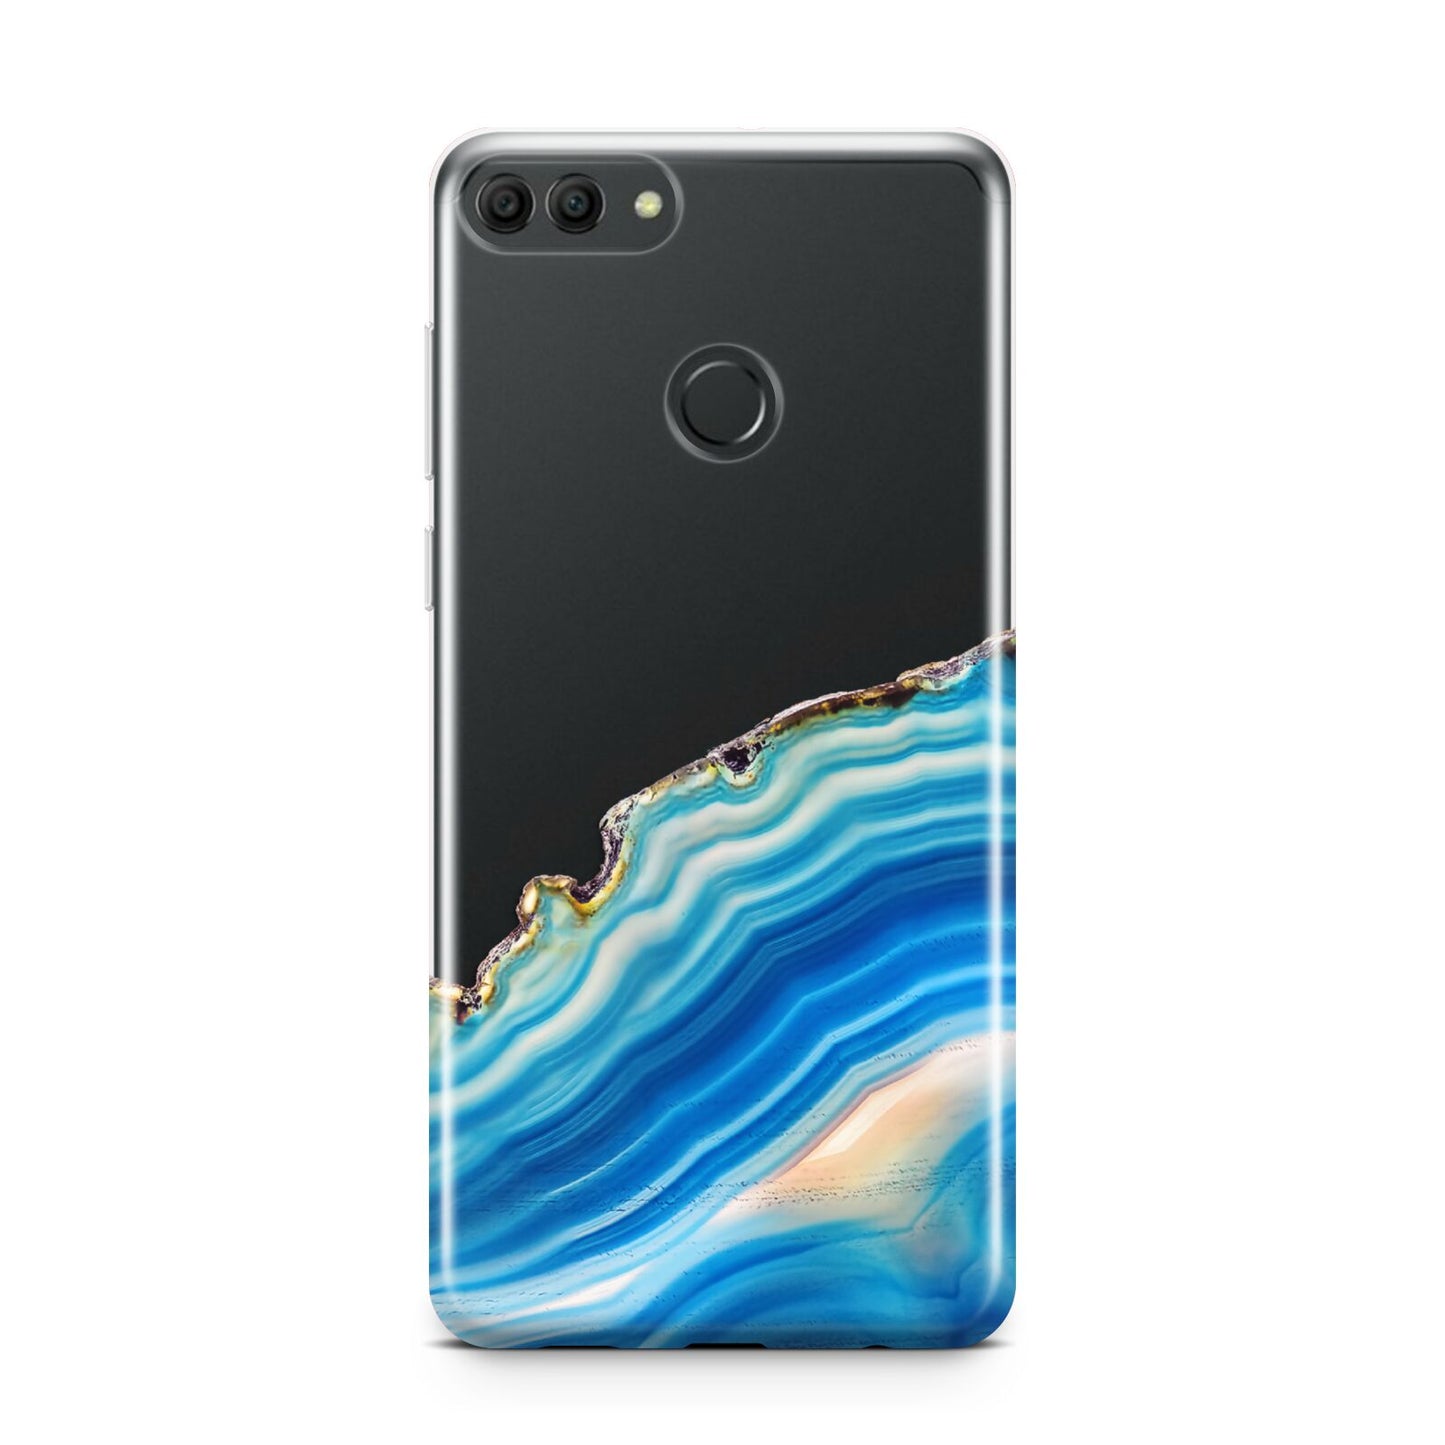 Agate Pale Blue and Bright Blue Huawei Y9 2018